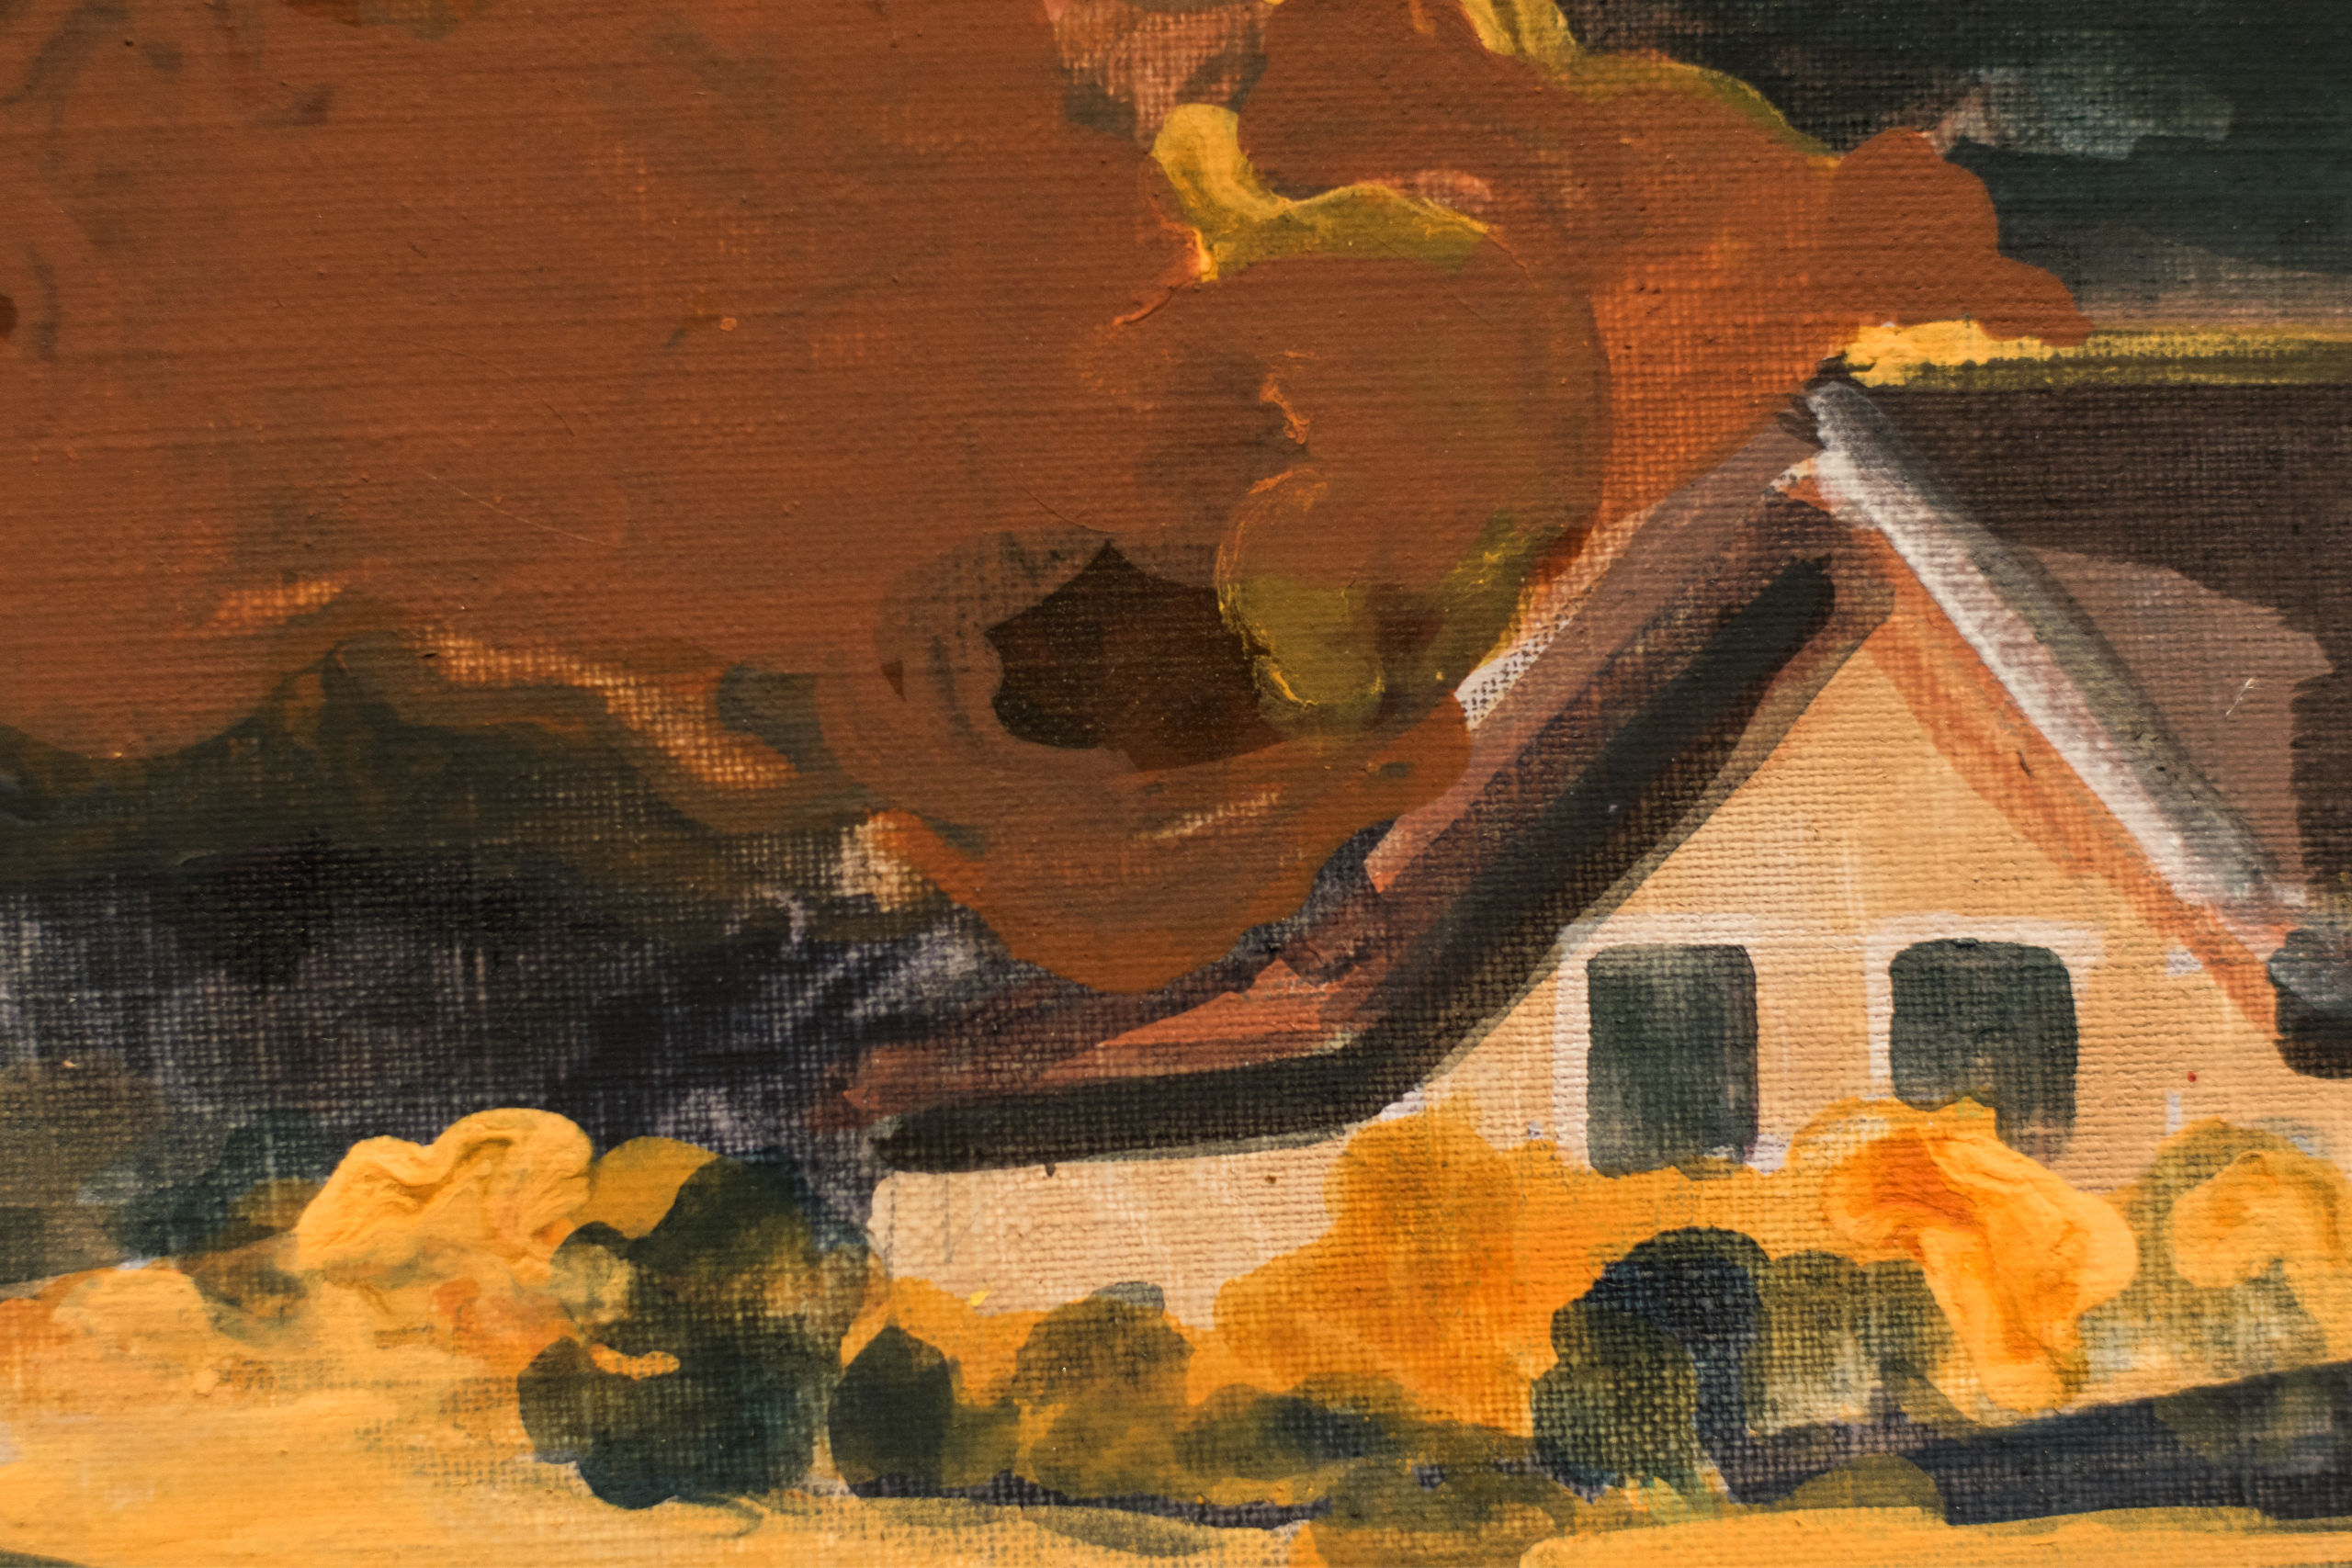 Rural house and landscape in earth tones, painting.